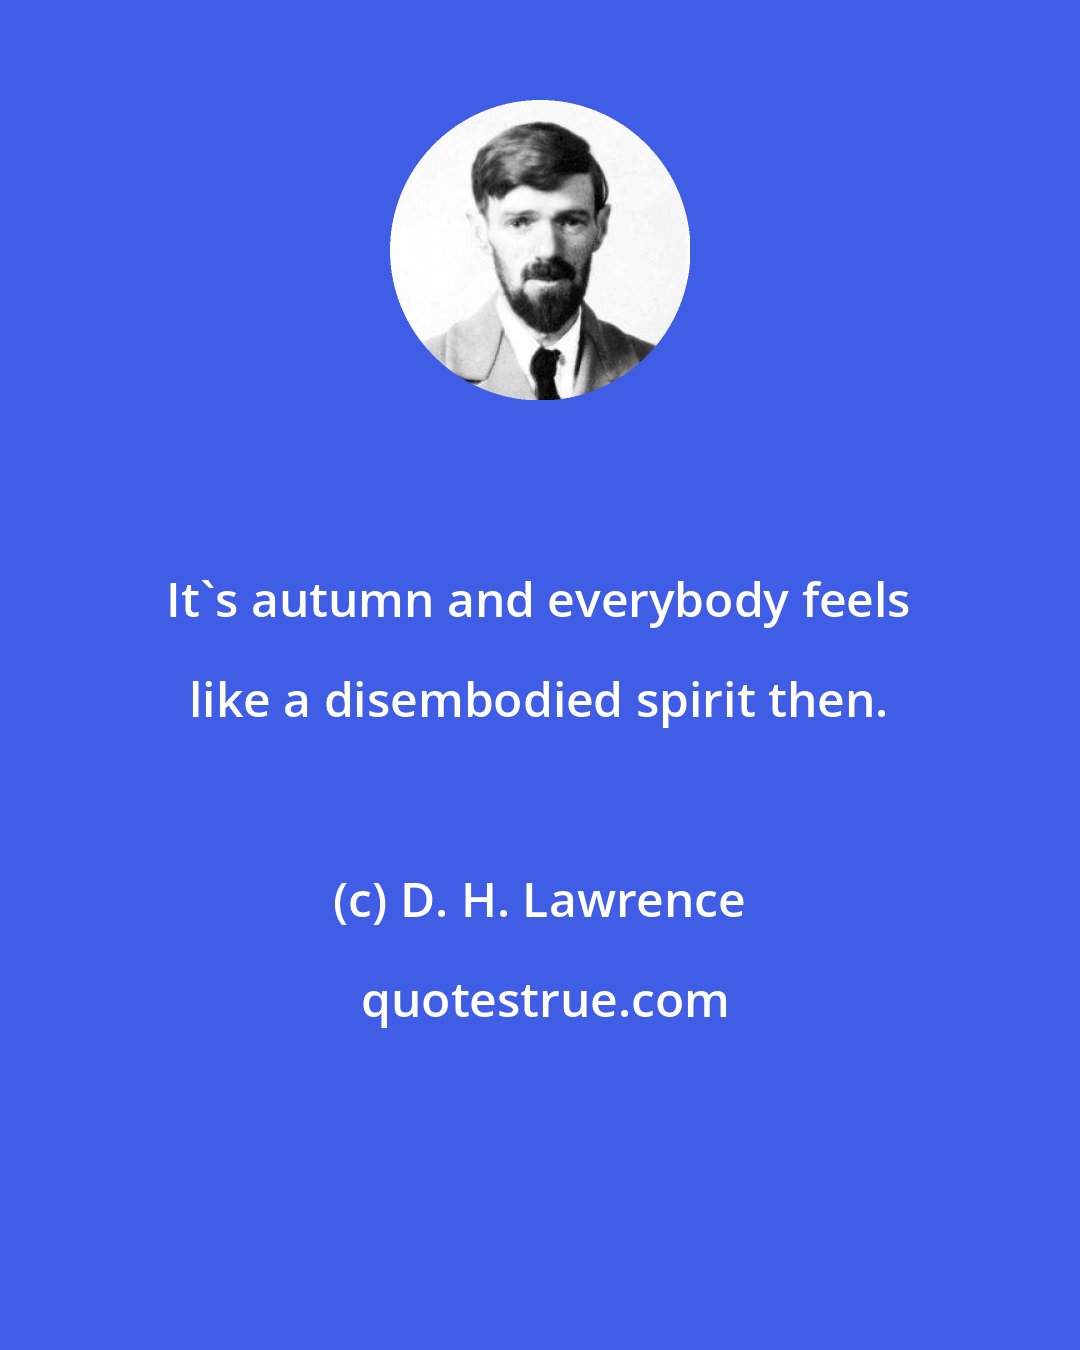 D. H. Lawrence: It's autumn and everybody feels like a disembodied spirit then.